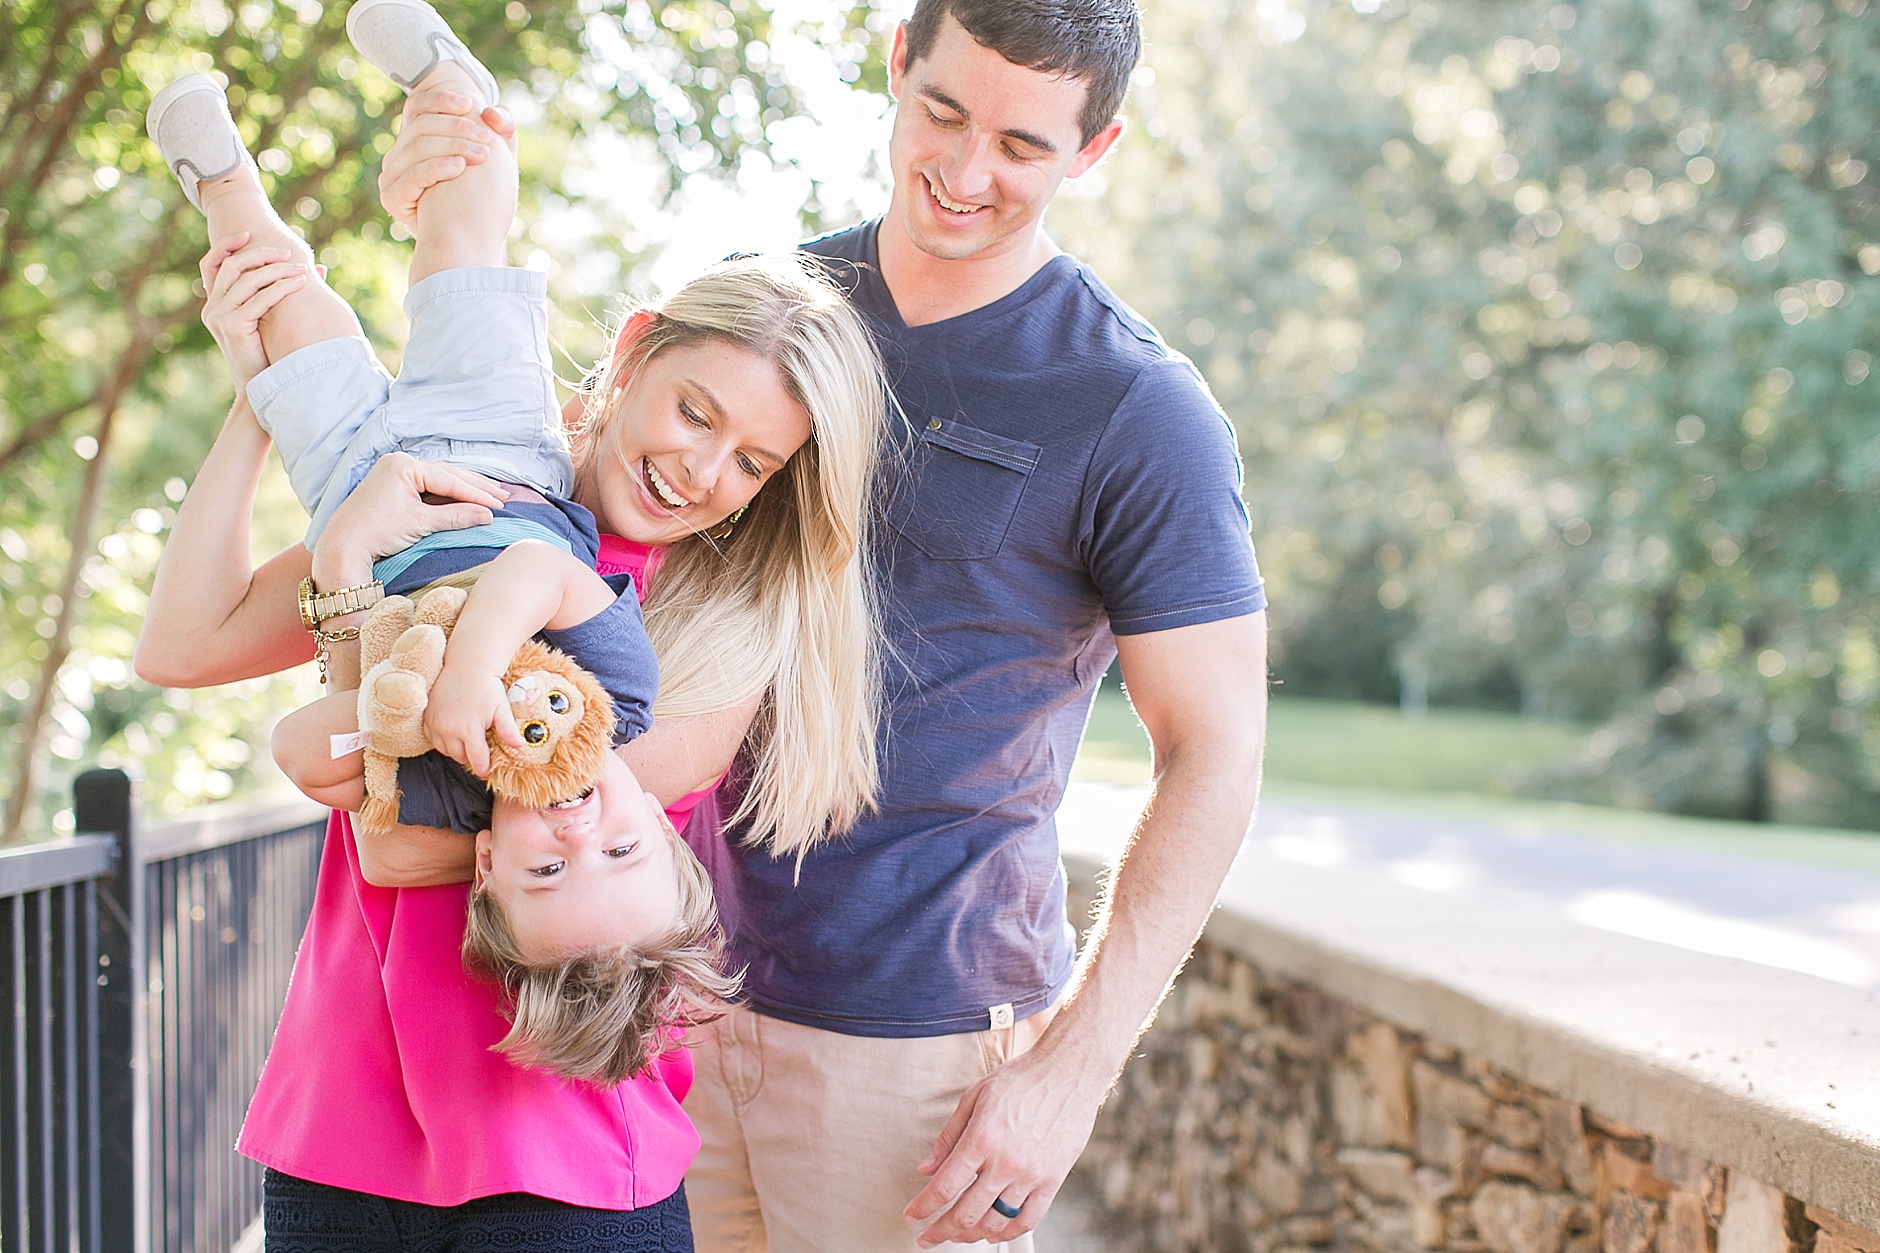 A later summer family portrait session in Noble Park, Paducah Kentucky by Rachael Houser Photography